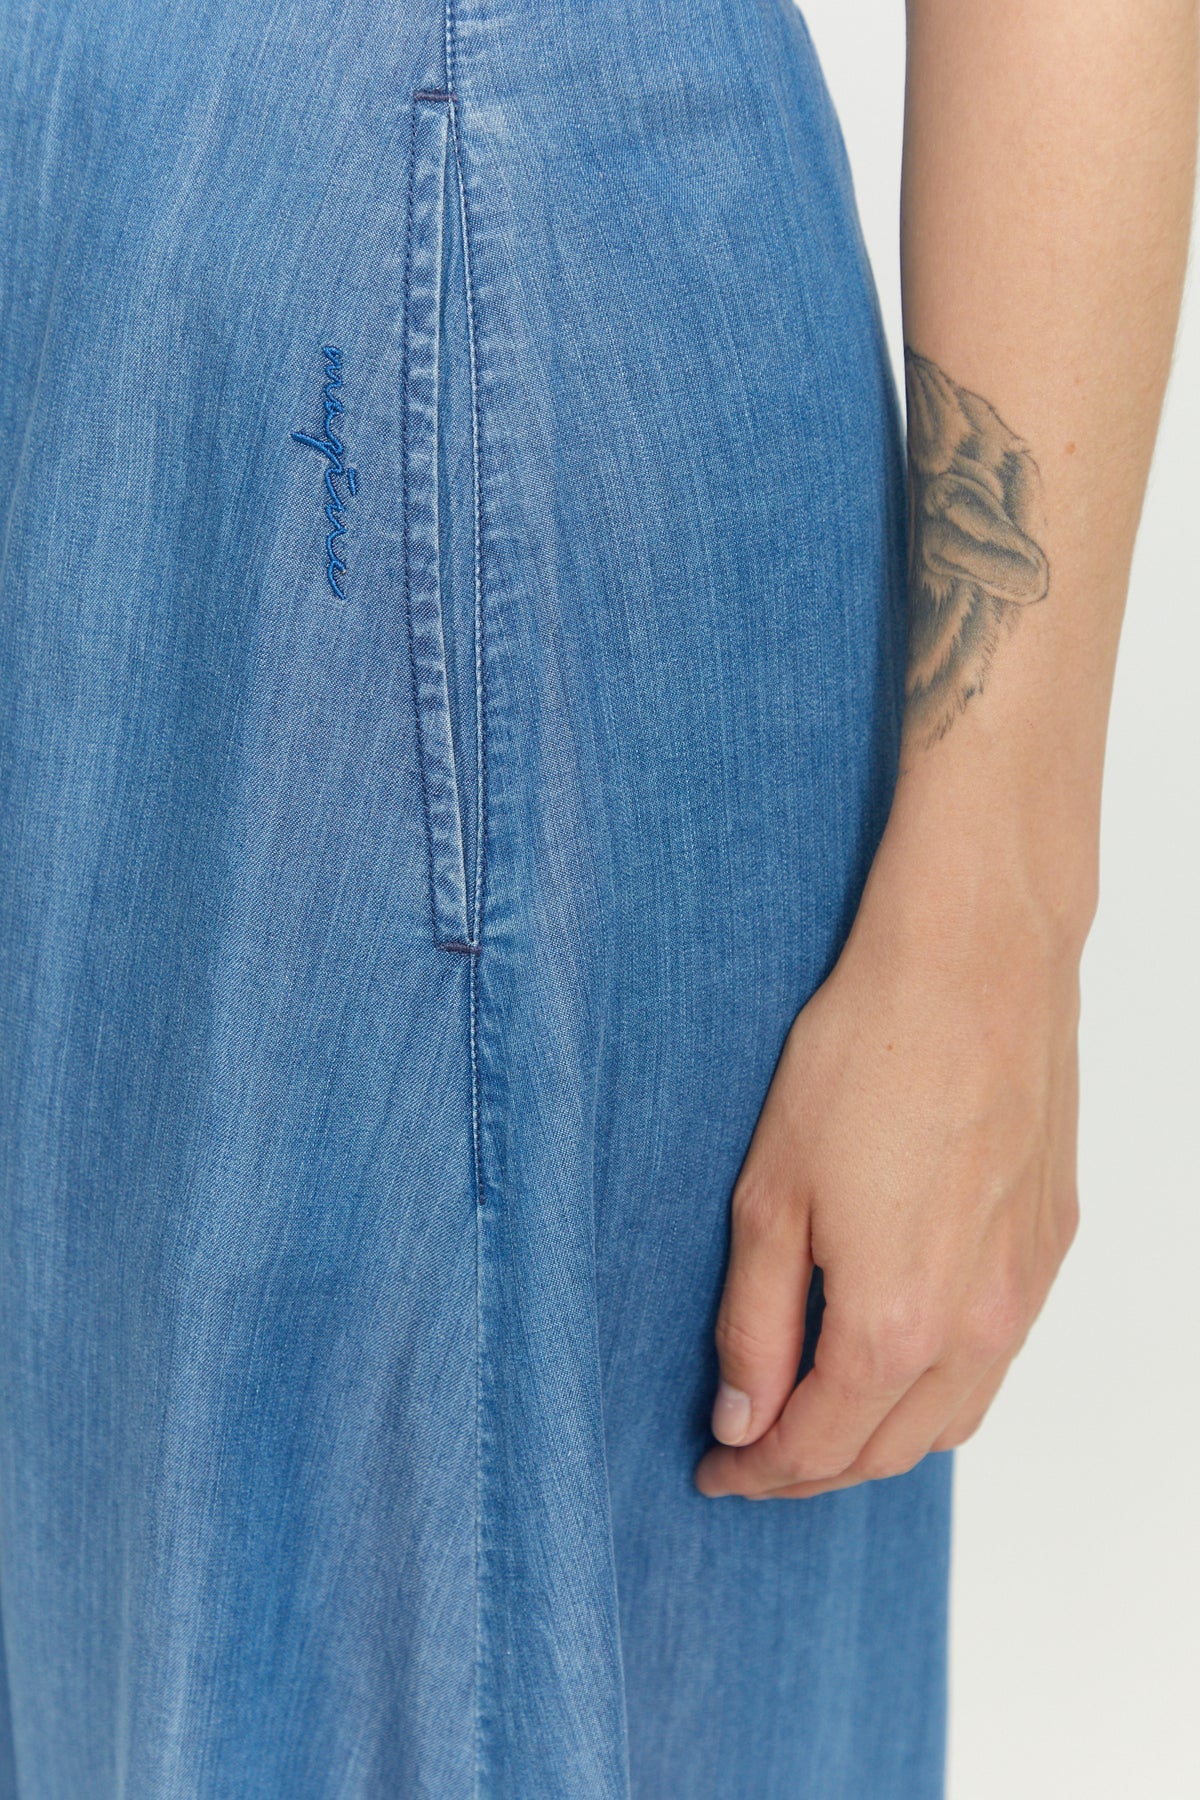 A-shape midi skirt in a mid denim wash, with a button placket down the front, an elasticated wIst and side pockets, made from sustainable Tencel™, by the German eco fashion brand Mazine.